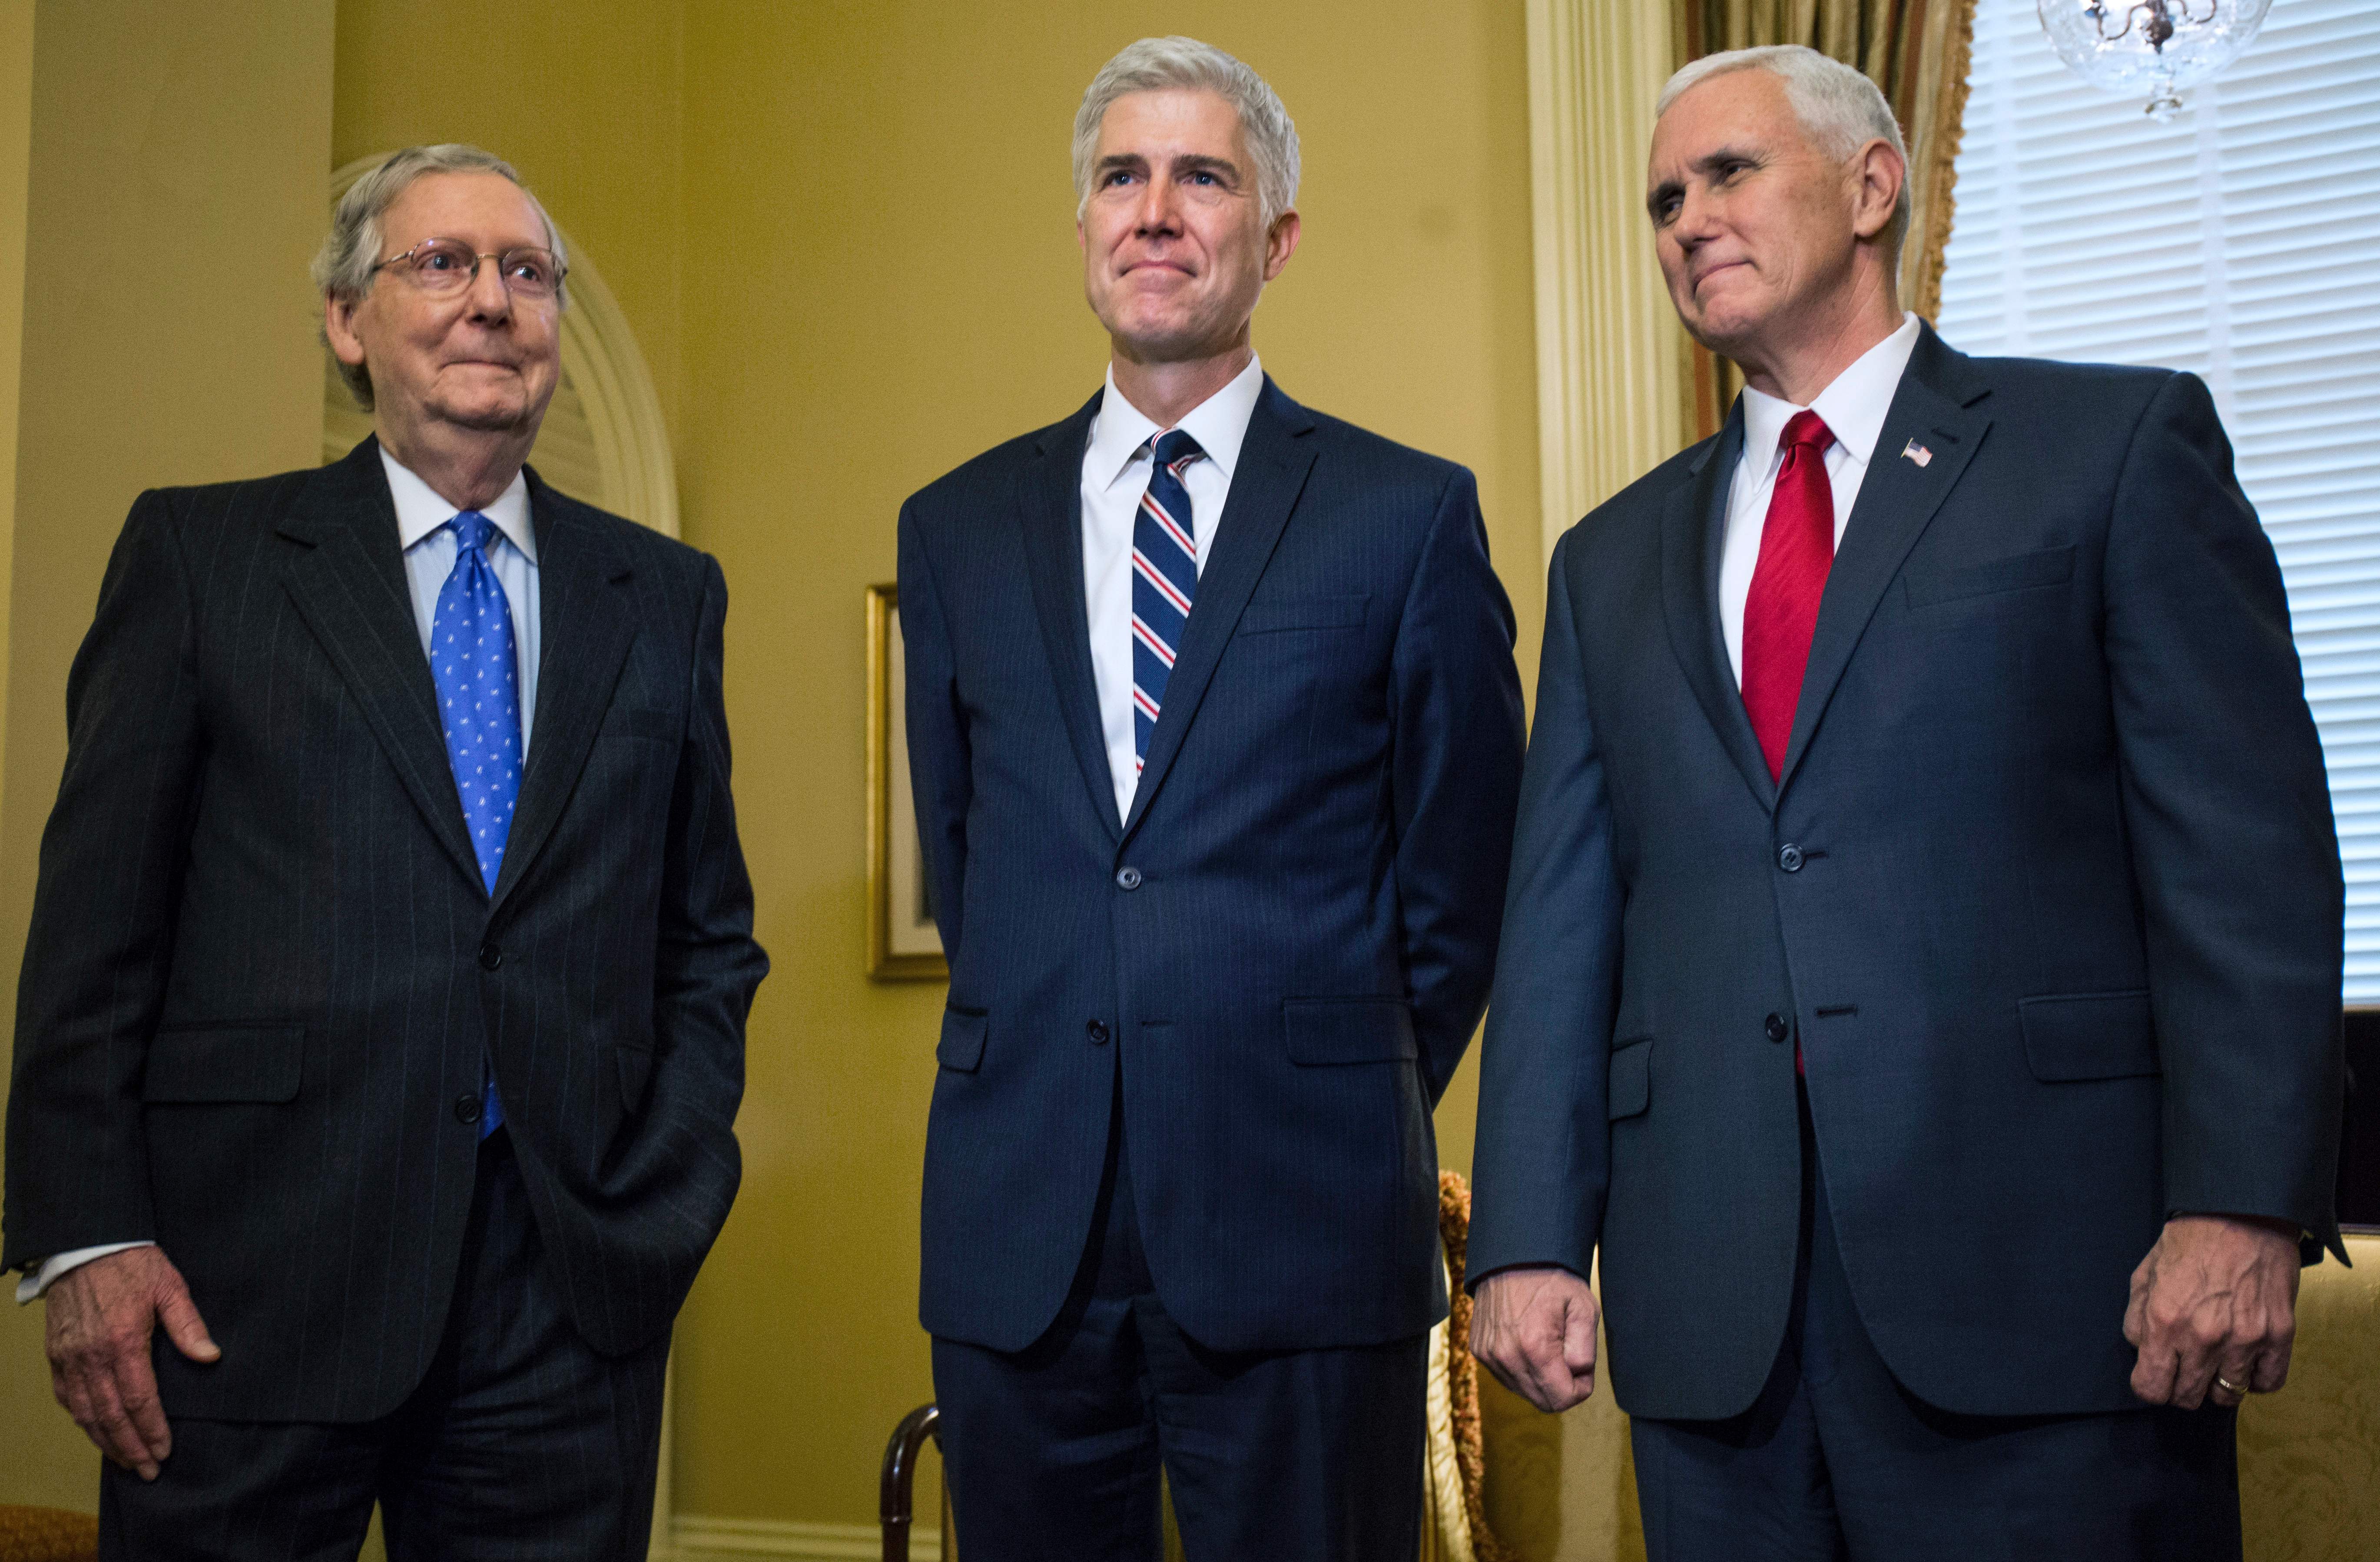 Mitch McConnell (R-KY), Justice Neil Gorsuch, and Vice President Mike Pence on February 1, 2017. (Zach Gibson/AFP/Getty Images)